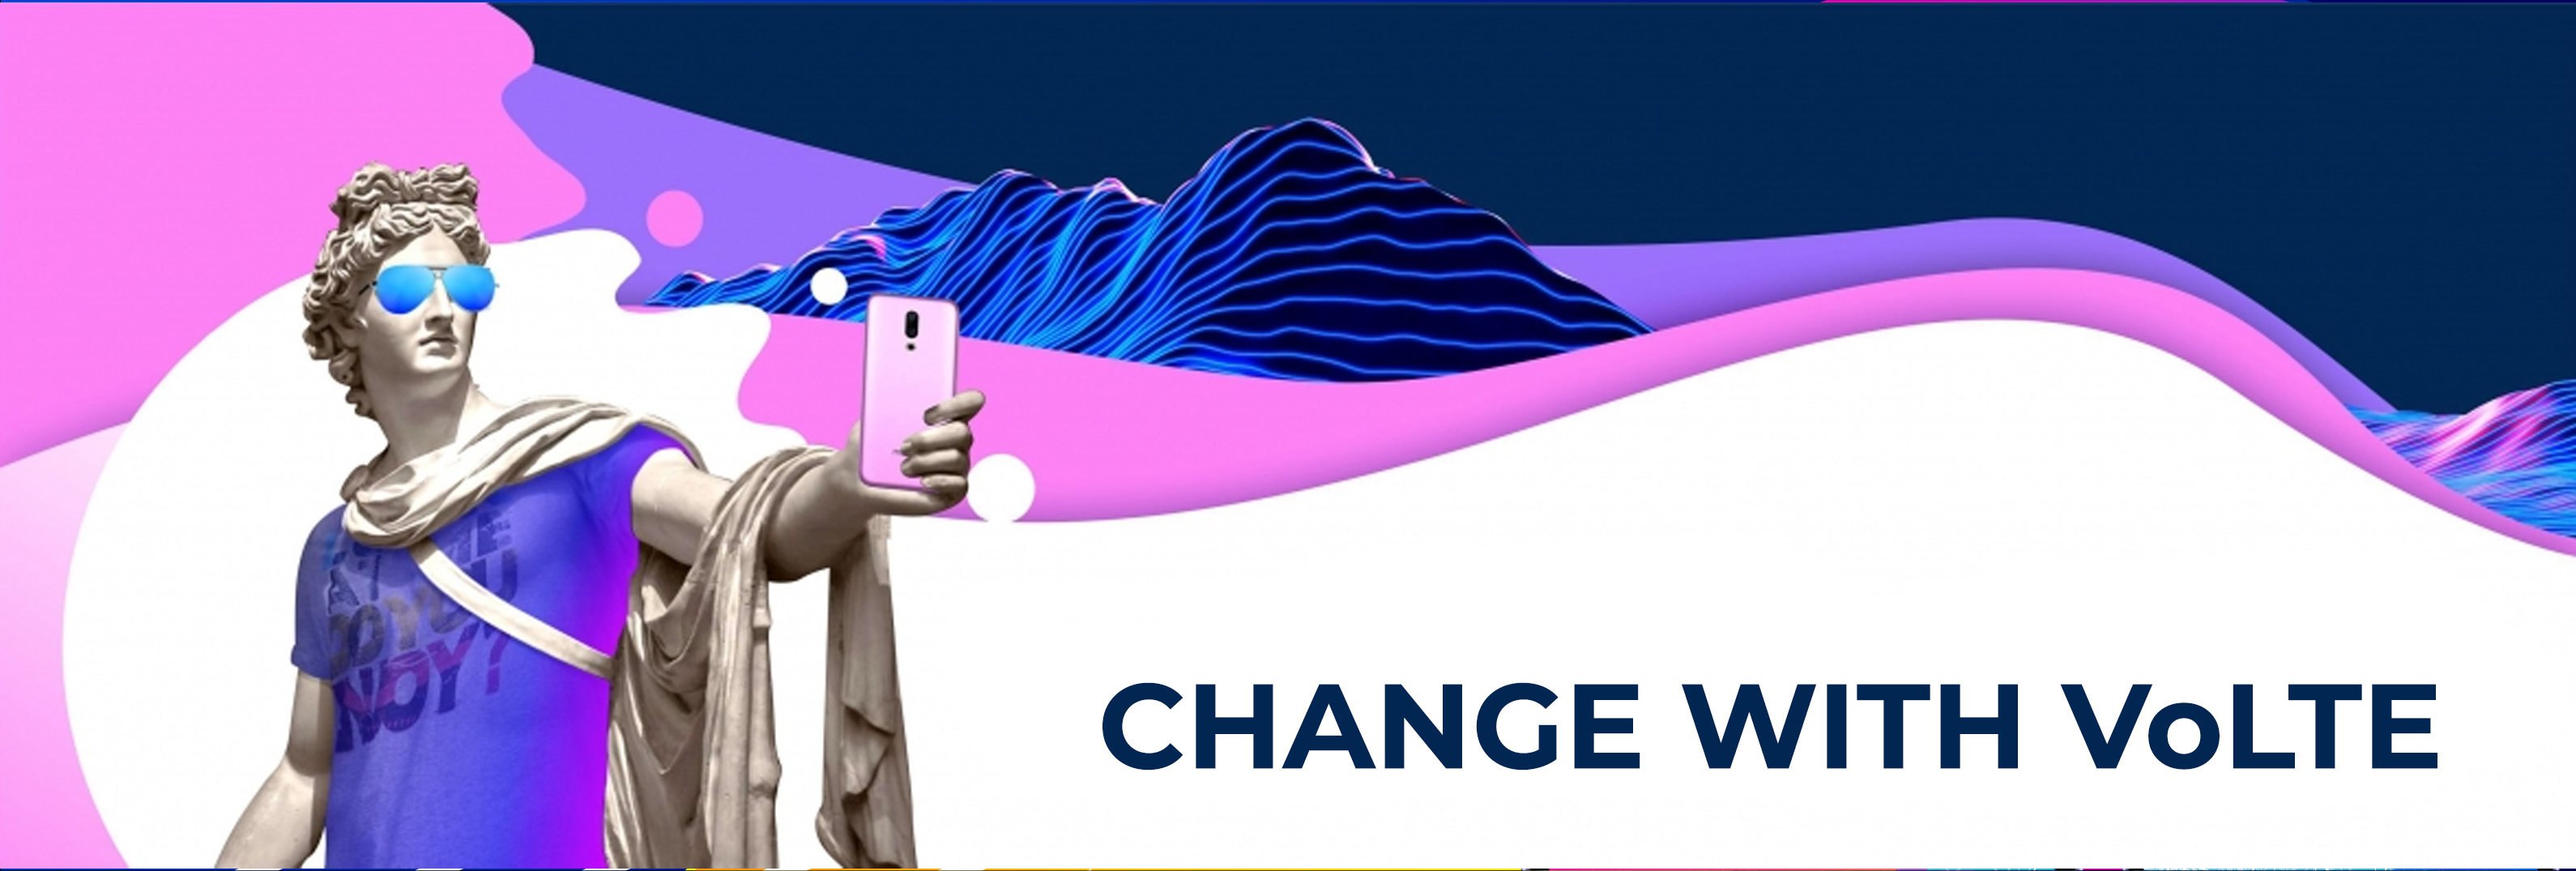 "Change with VoLTE" promotion!